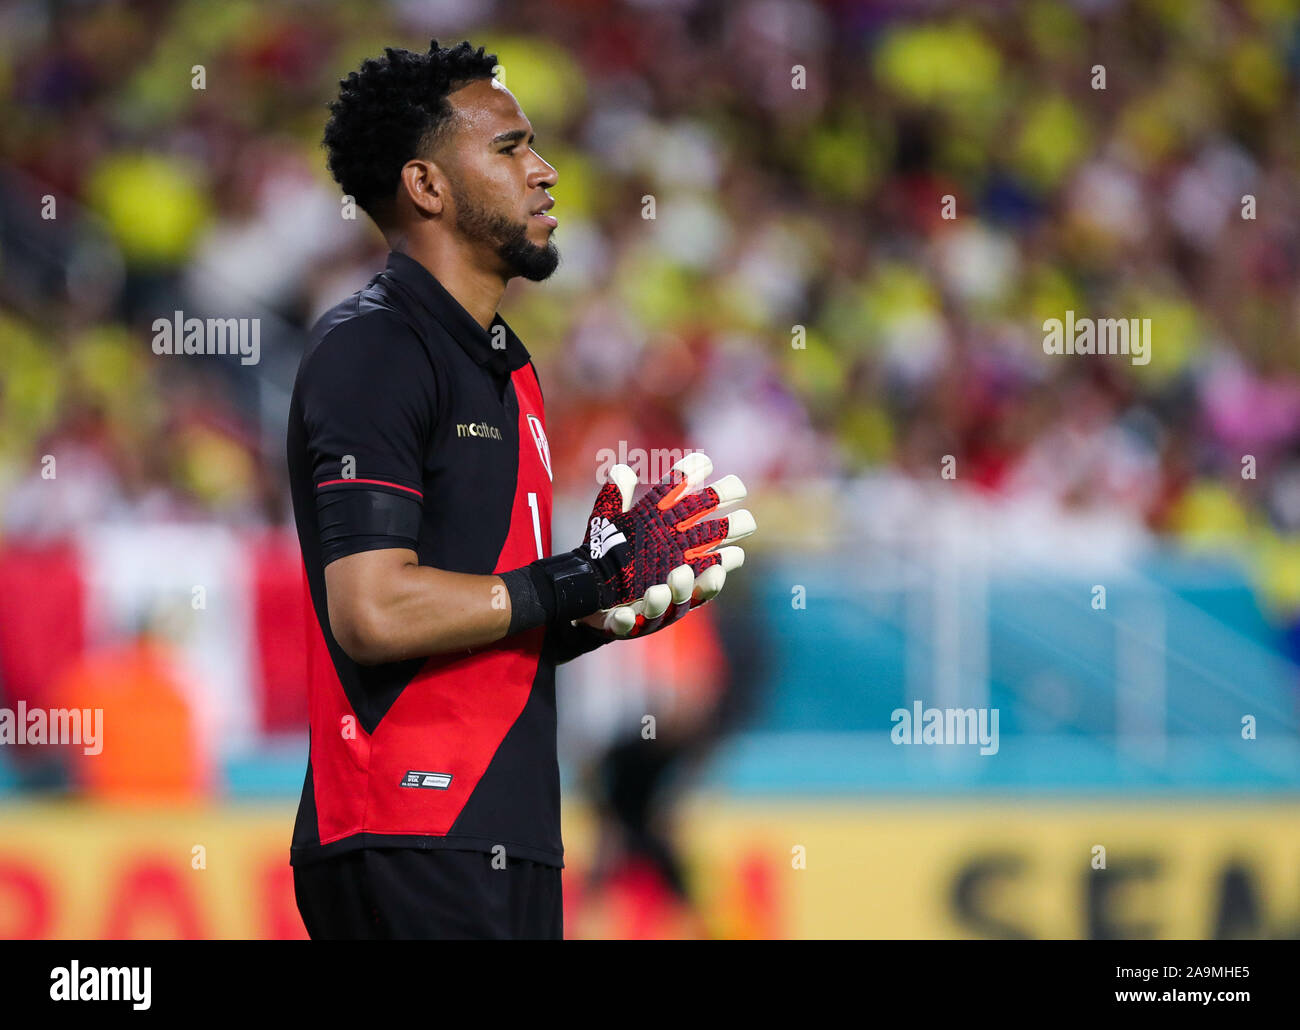 Miami Gardens, Florida, USA. 15th Nov, 2019. Peru goalkeeper Pedro Gallese (1) looks on during a friendly soccer match against Colombia at the Hard Rock Stadium in Miami Gardens, Florida. Credit: Mario Houben/ZUMA Wire/Alamy Live News Stock Photo